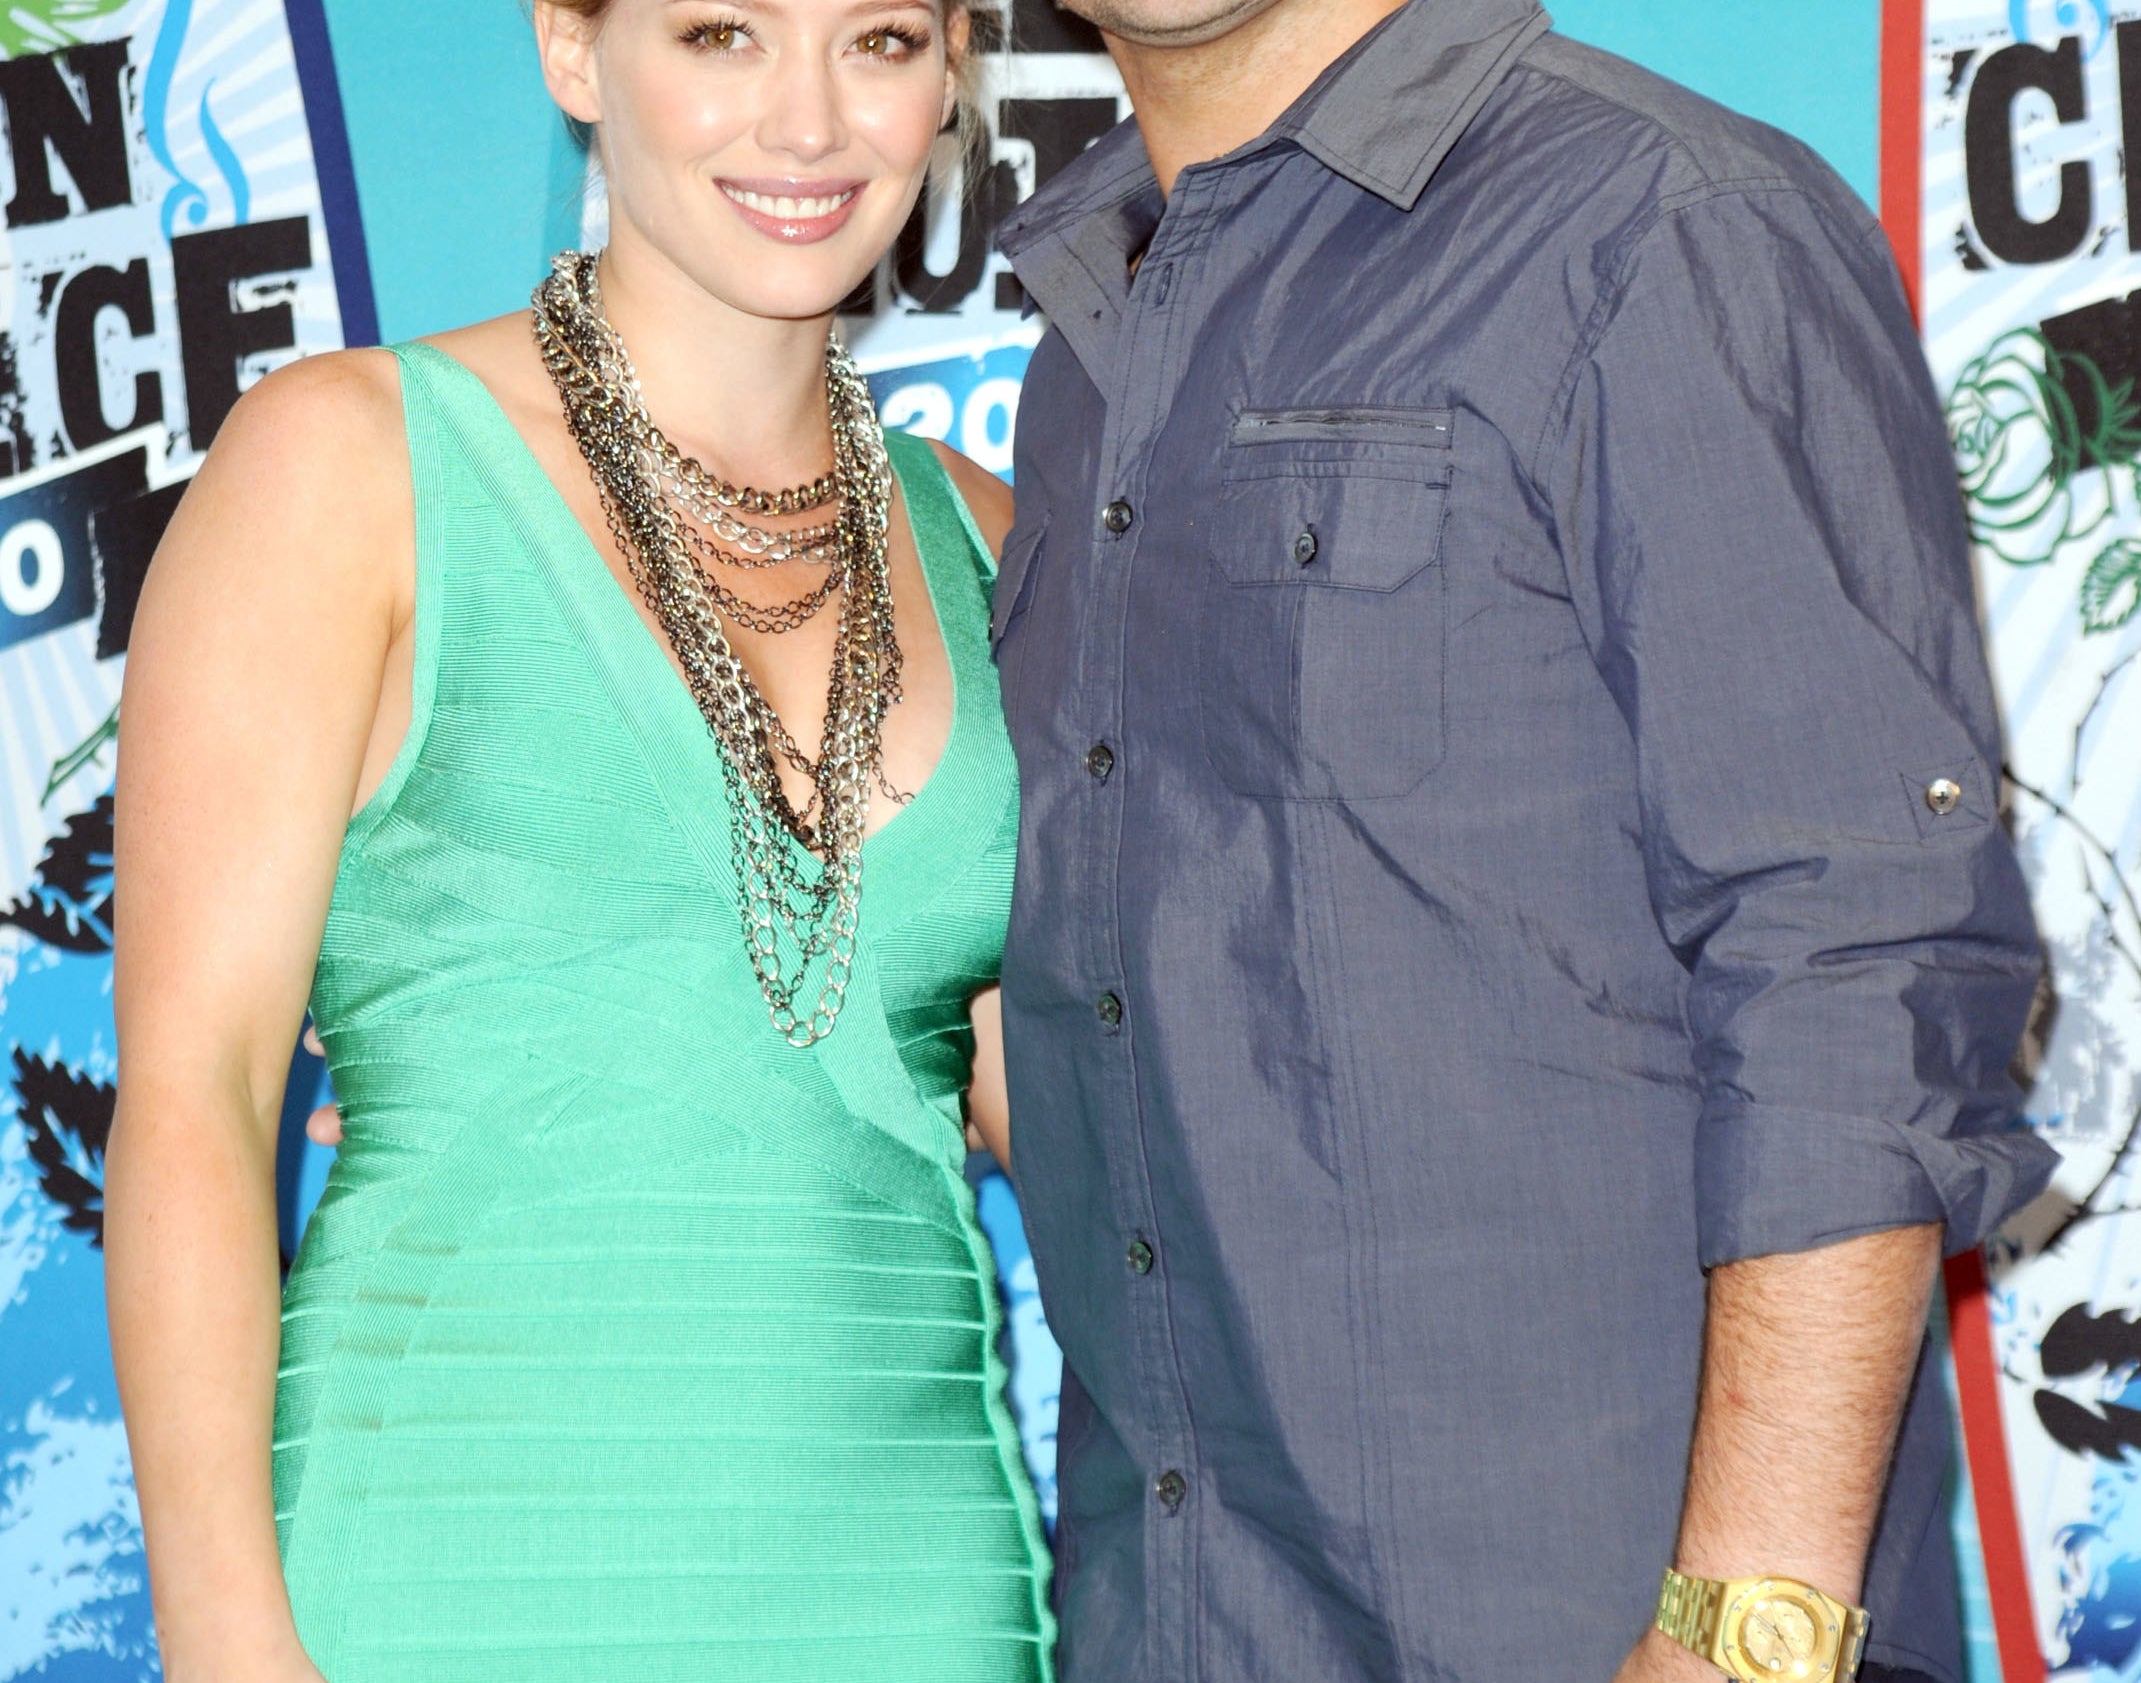 Hilary Duff and Mike Comrie posing in the press room of the 2010 Teen Choice Awards.